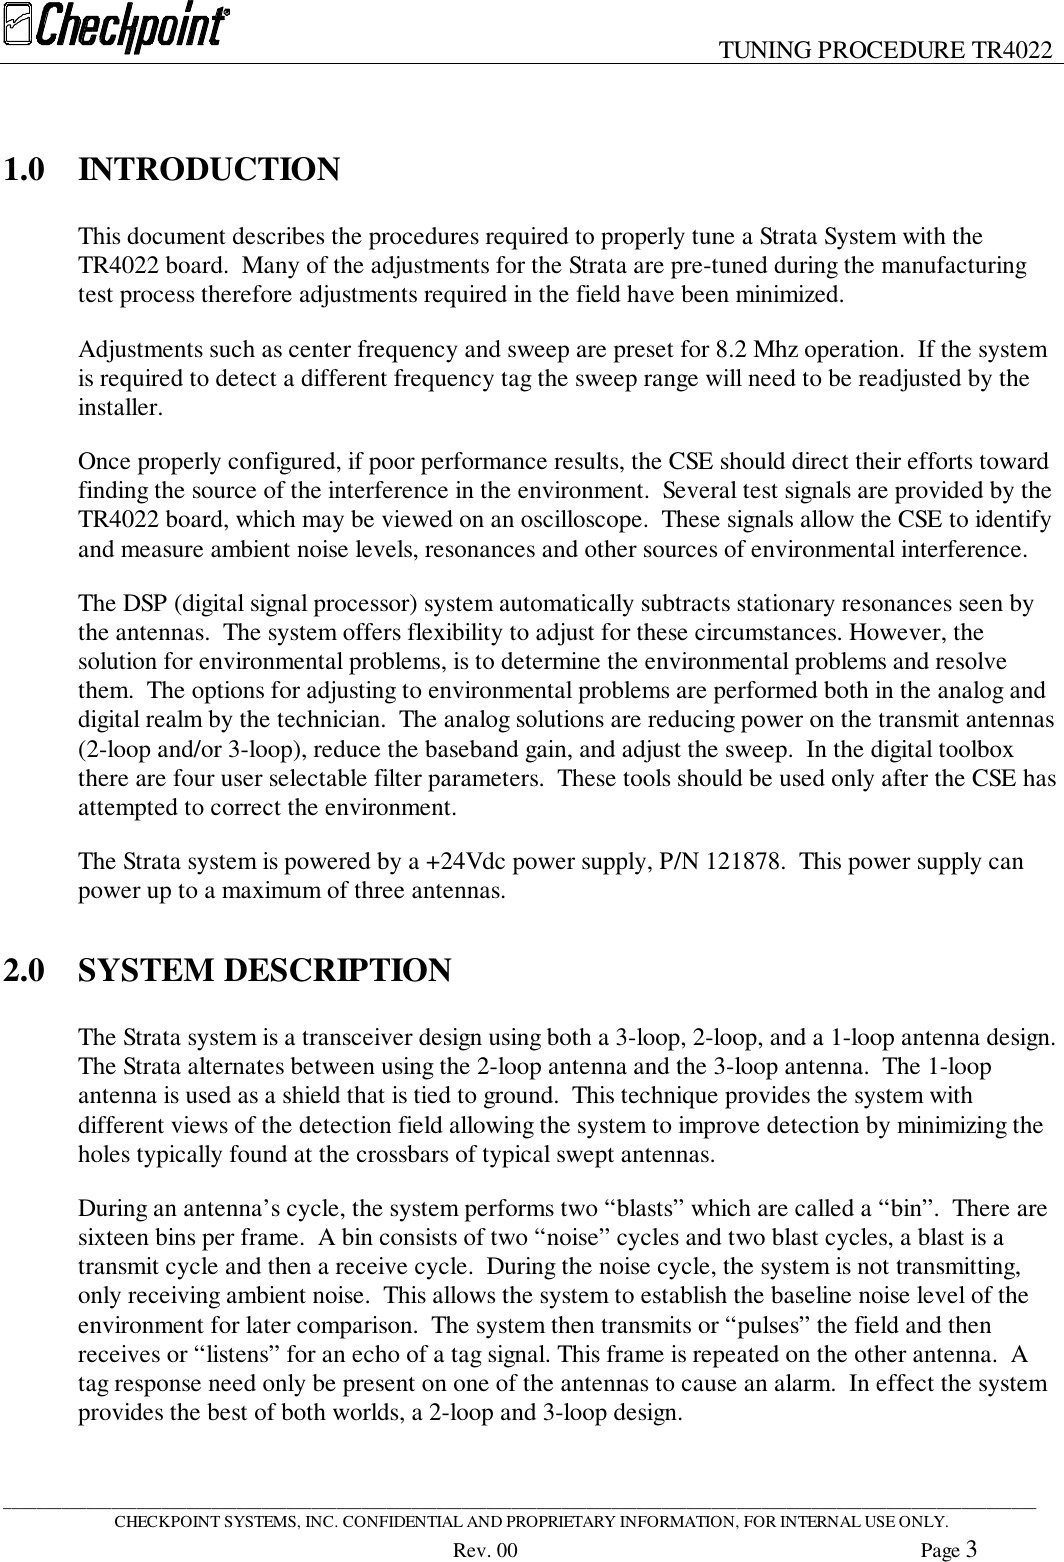 TUNING PROCEDURE TR4022____________________________________________________________________________________________________________________________CHECKPOINT SYSTEMS, INC. CONFIDENTIAL AND PROPRIETARY INFORMATION, FOR INTERNAL USE ONLY.Rev. 00 Page 31.0 INTRODUCTIONThis document describes the procedures required to properly tune a Strata System with theTR4022 board.  Many of the adjustments for the Strata are pre-tuned during the manufacturingtest process therefore adjustments required in the field have been minimized.Adjustments such as center frequency and sweep are preset for 8.2 Mhz operation.  If the systemis required to detect a different frequency tag the sweep range will need to be readjusted by theinstaller.Once properly configured, if poor performance results, the CSE should direct their efforts towardfinding the source of the interference in the environment.  Several test signals are provided by theTR4022 board, which may be viewed on an oscilloscope.  These signals allow the CSE to identifyand measure ambient noise levels, resonances and other sources of environmental interference.The DSP (digital signal processor) system automatically subtracts stationary resonances seen bythe antennas.  The system offers flexibility to adjust for these circumstances. However, thesolution for environmental problems, is to determine the environmental problems and resolvethem.  The options for adjusting to environmental problems are performed both in the analog anddigital realm by the technician.  The analog solutions are reducing power on the transmit antennas(2-loop and/or 3-loop), reduce the baseband gain, and adjust the sweep.  In the digital toolboxthere are four user selectable filter parameters.  These tools should be used only after the CSE hasattempted to correct the environment.The Strata system is powered by a +24Vdc power supply, P/N 121878.  This power supply canpower up to a maximum of three antennas.2.0 SYSTEM DESCRIPTIONThe Strata system is a transceiver design using both a 3-loop, 2-loop, and a 1-loop antenna design.The Strata alternates between using the 2-loop antenna and the 3-loop antenna.  The 1-loopantenna is used as a shield that is tied to ground.  This technique provides the system withdifferent views of the detection field allowing the system to improve detection by minimizing theholes typically found at the crossbars of typical swept antennas.During an antenna’s cycle, the system performs two “blasts” which are called a “bin”.  There aresixteen bins per frame.  A bin consists of two “noise” cycles and two blast cycles, a blast is atransmit cycle and then a receive cycle.  During the noise cycle, the system is not transmitting,only receiving ambient noise.  This allows the system to establish the baseline noise level of theenvironment for later comparison.  The system then transmits or “pulses” the field and thenreceives or “listens” for an echo of a tag signal. This frame is repeated on the other antenna.  Atag response need only be present on one of the antennas to cause an alarm.  In effect the systemprovides the best of both worlds, a 2-loop and 3-loop design.